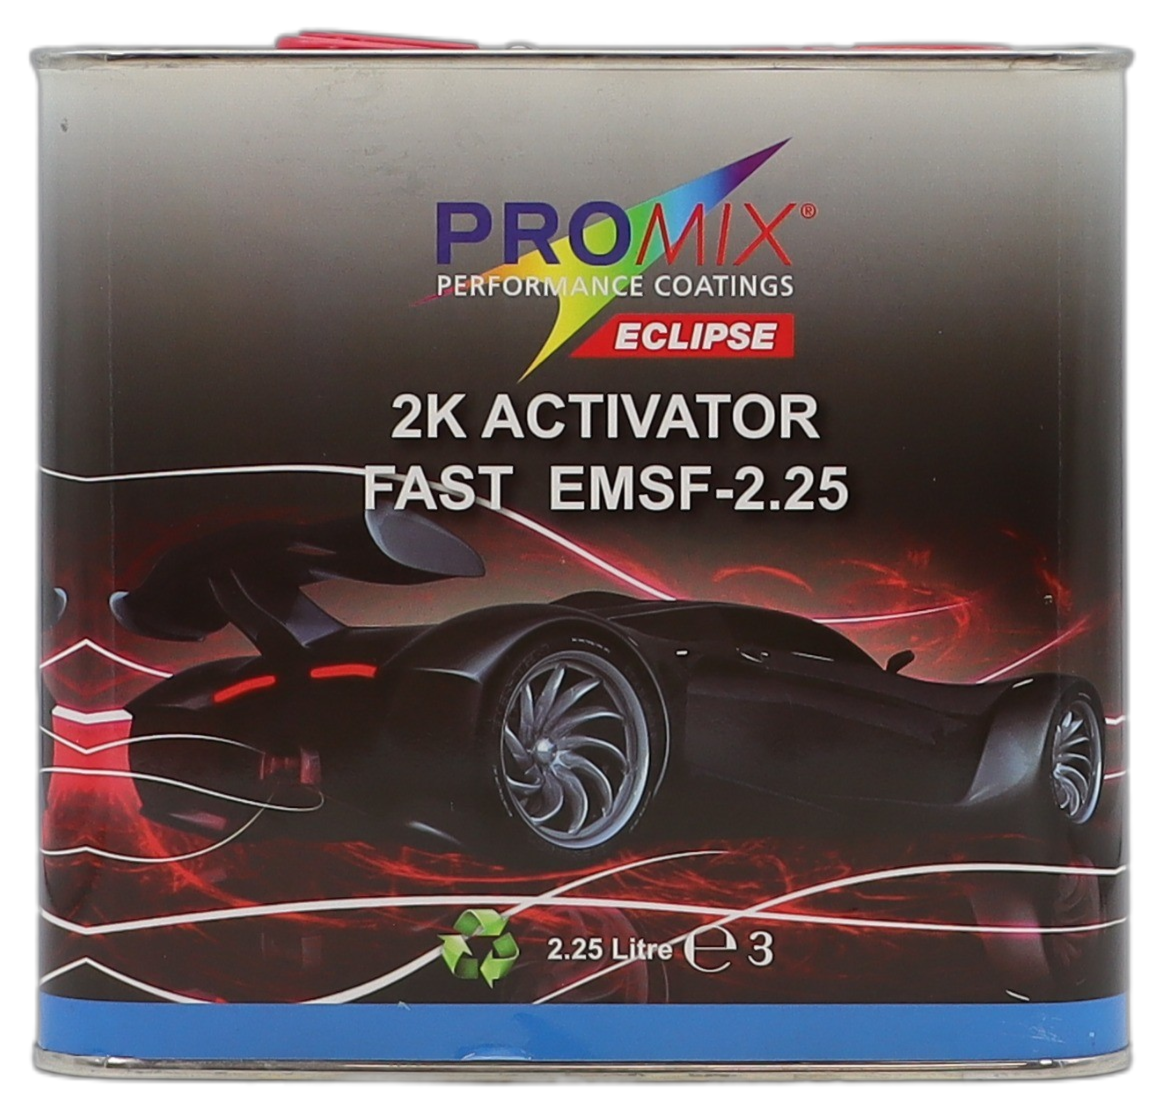 UHS Activator Normal Product Image